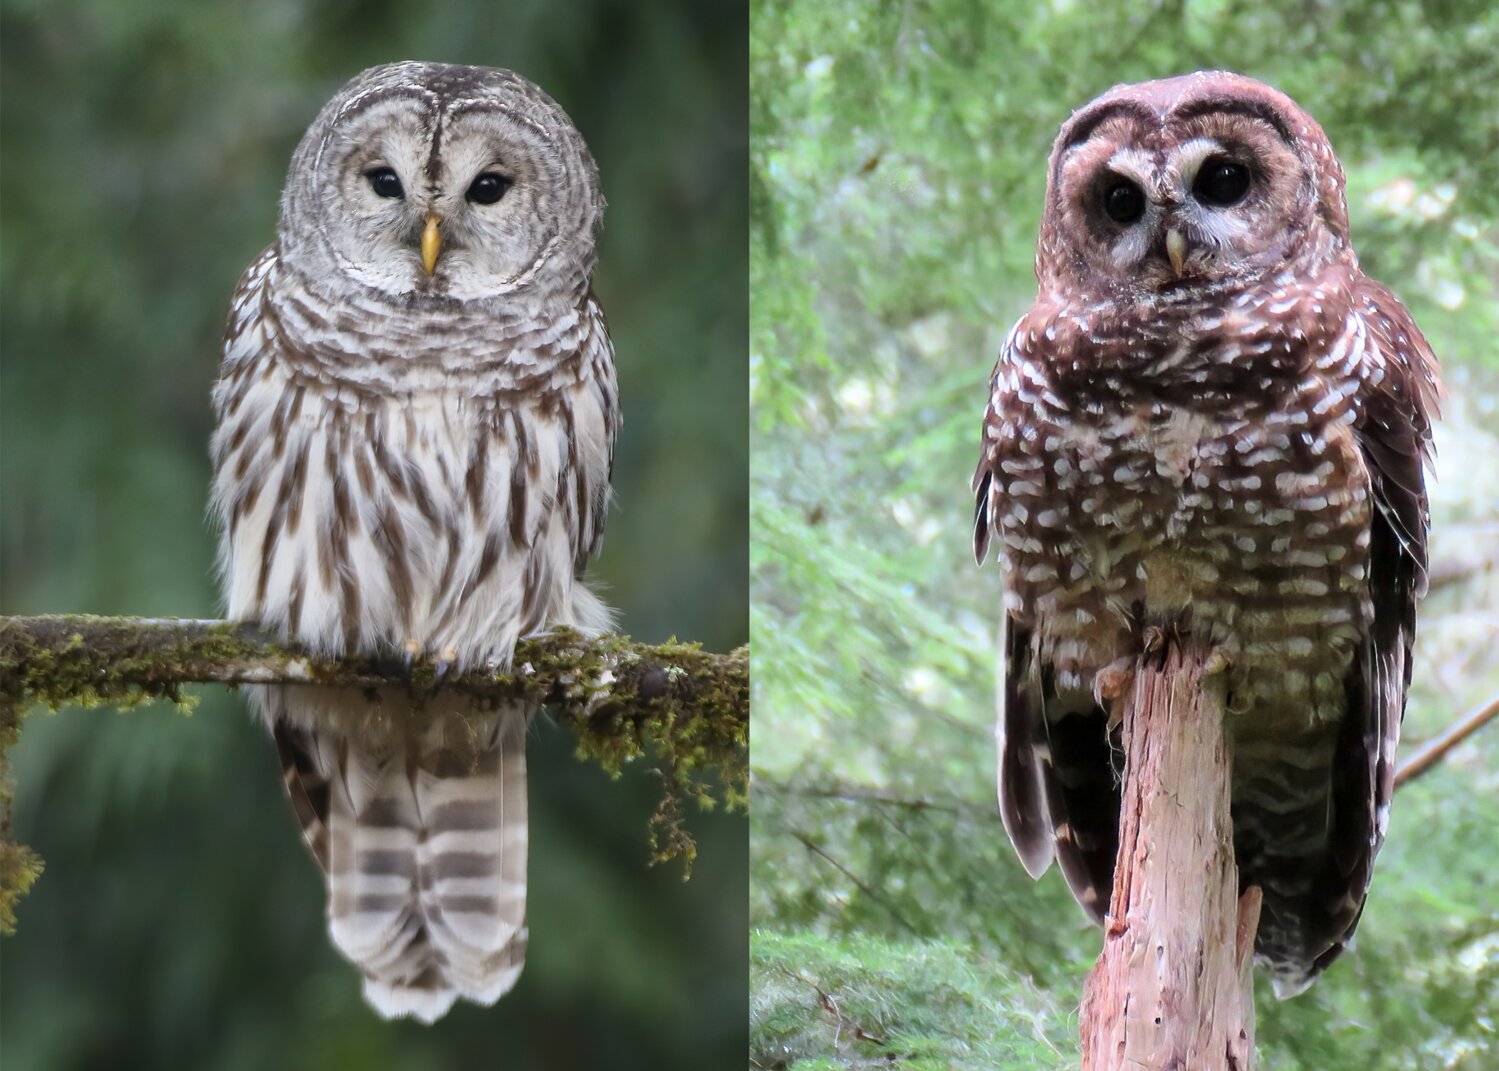 Side by side - Barred Owl on the left & Northern Spotted Owl on the right. Barred Owls are an invasive species driving our own Spotted Owls from their territories with disastrous outcomes.